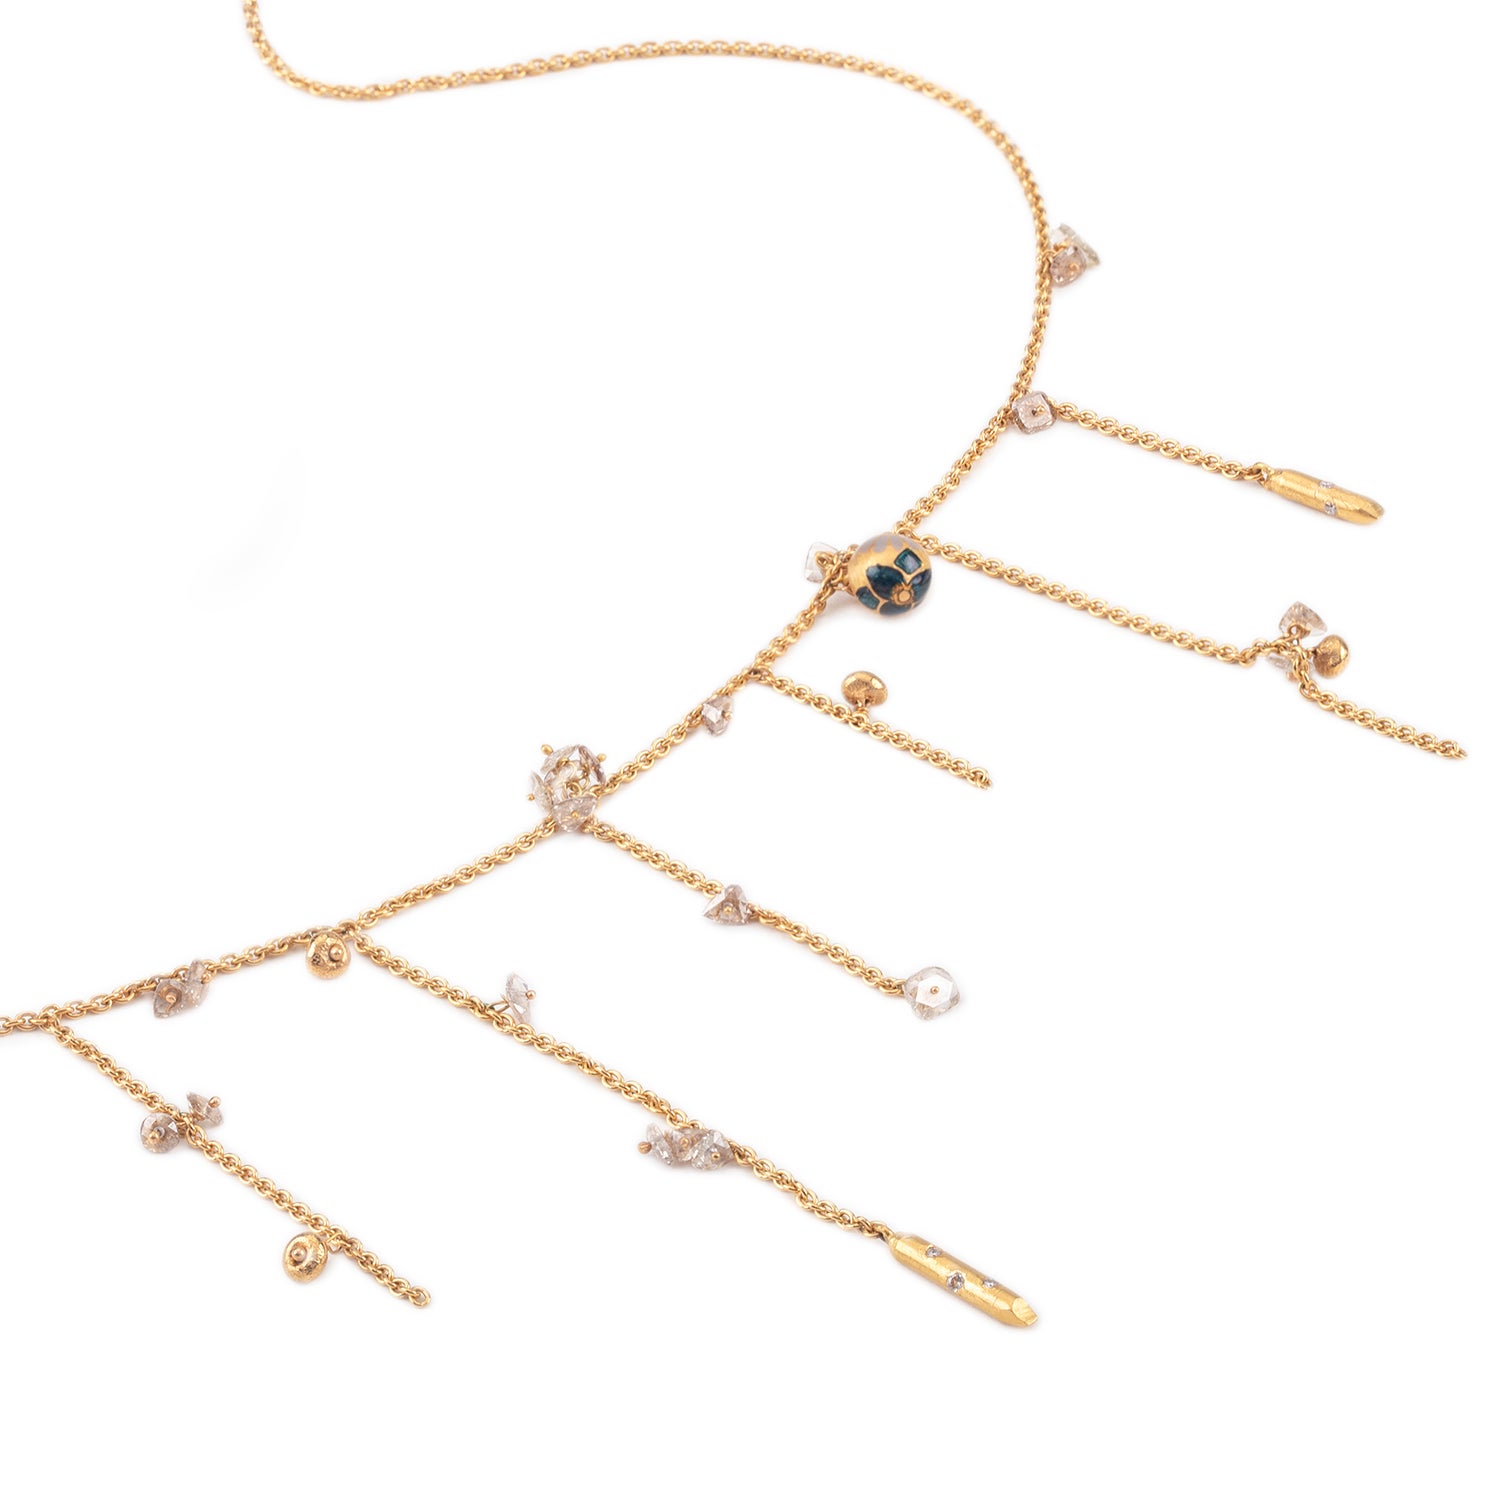 22K Gold Handmade Rose Cut Diamond and Enamel Ball Fringe Necklace by Agaro For Sale